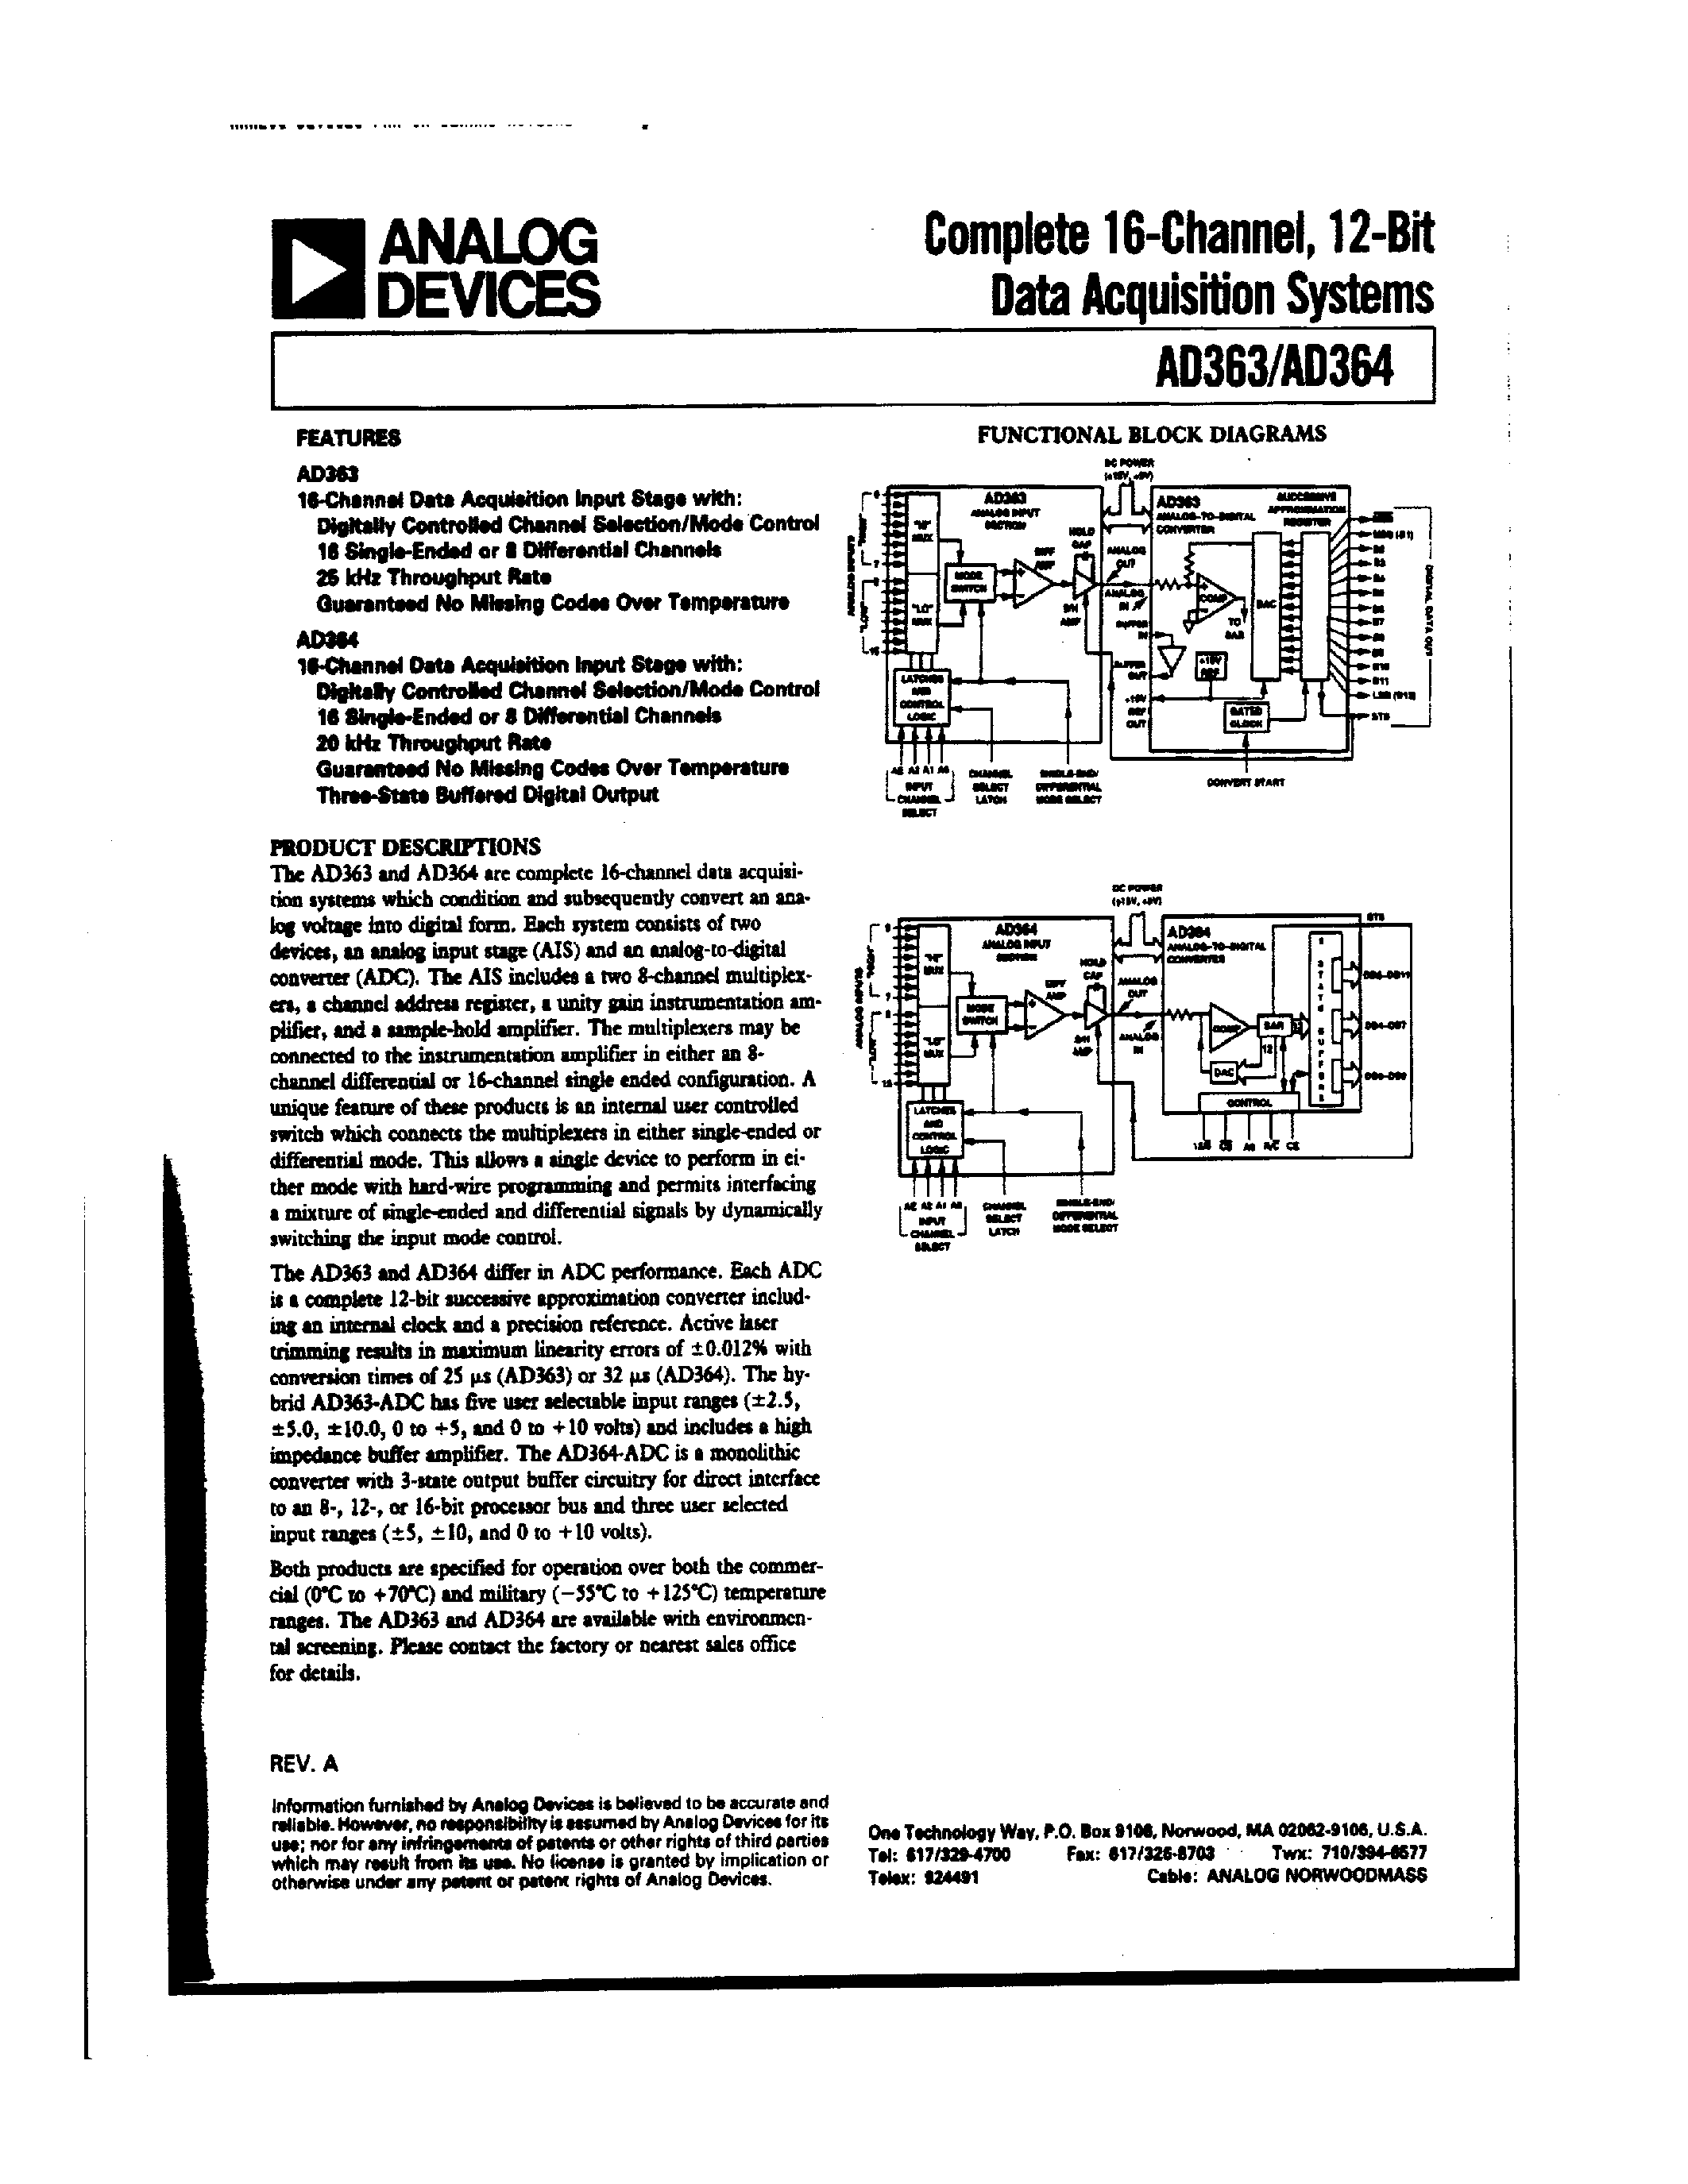 Datasheet AD364RK - Complete 16-Channel/12-Bit Data Acquisition System page 1